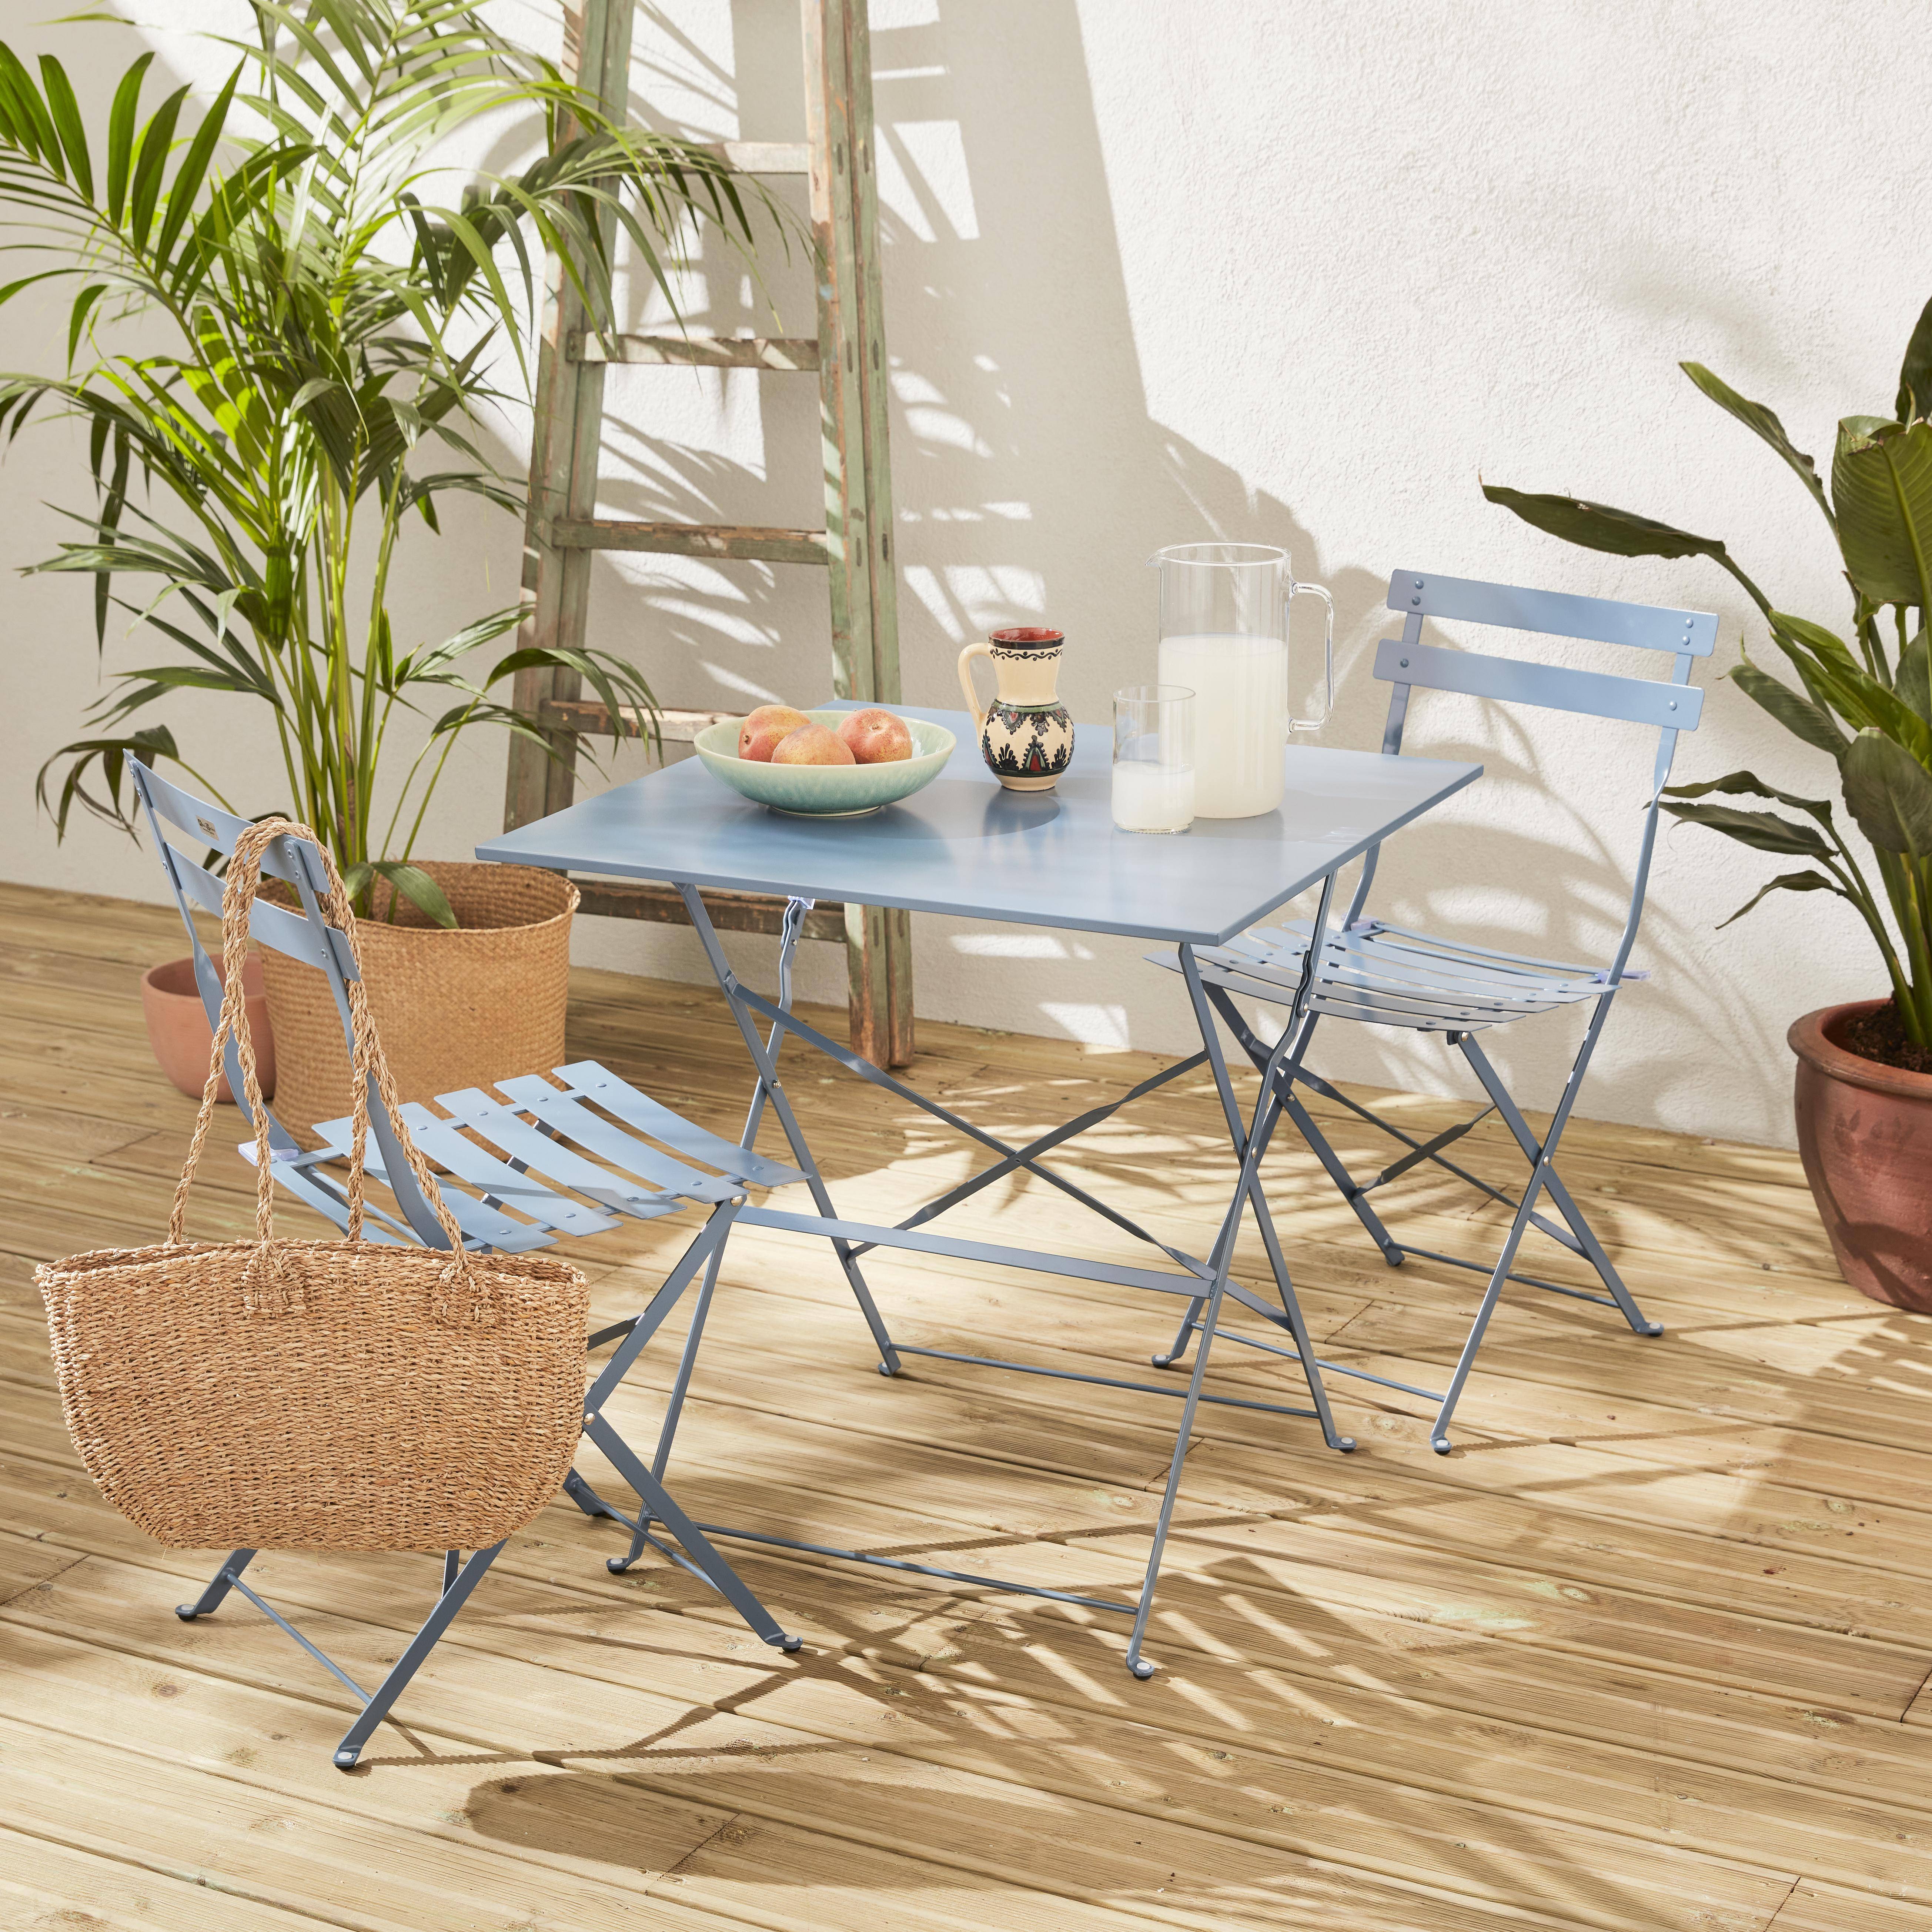 2-seater foldable thermo-lacquered steel bistro garden table with chairs, 70x70cm - Emilia - Grey Blue,sweeek,Photo1